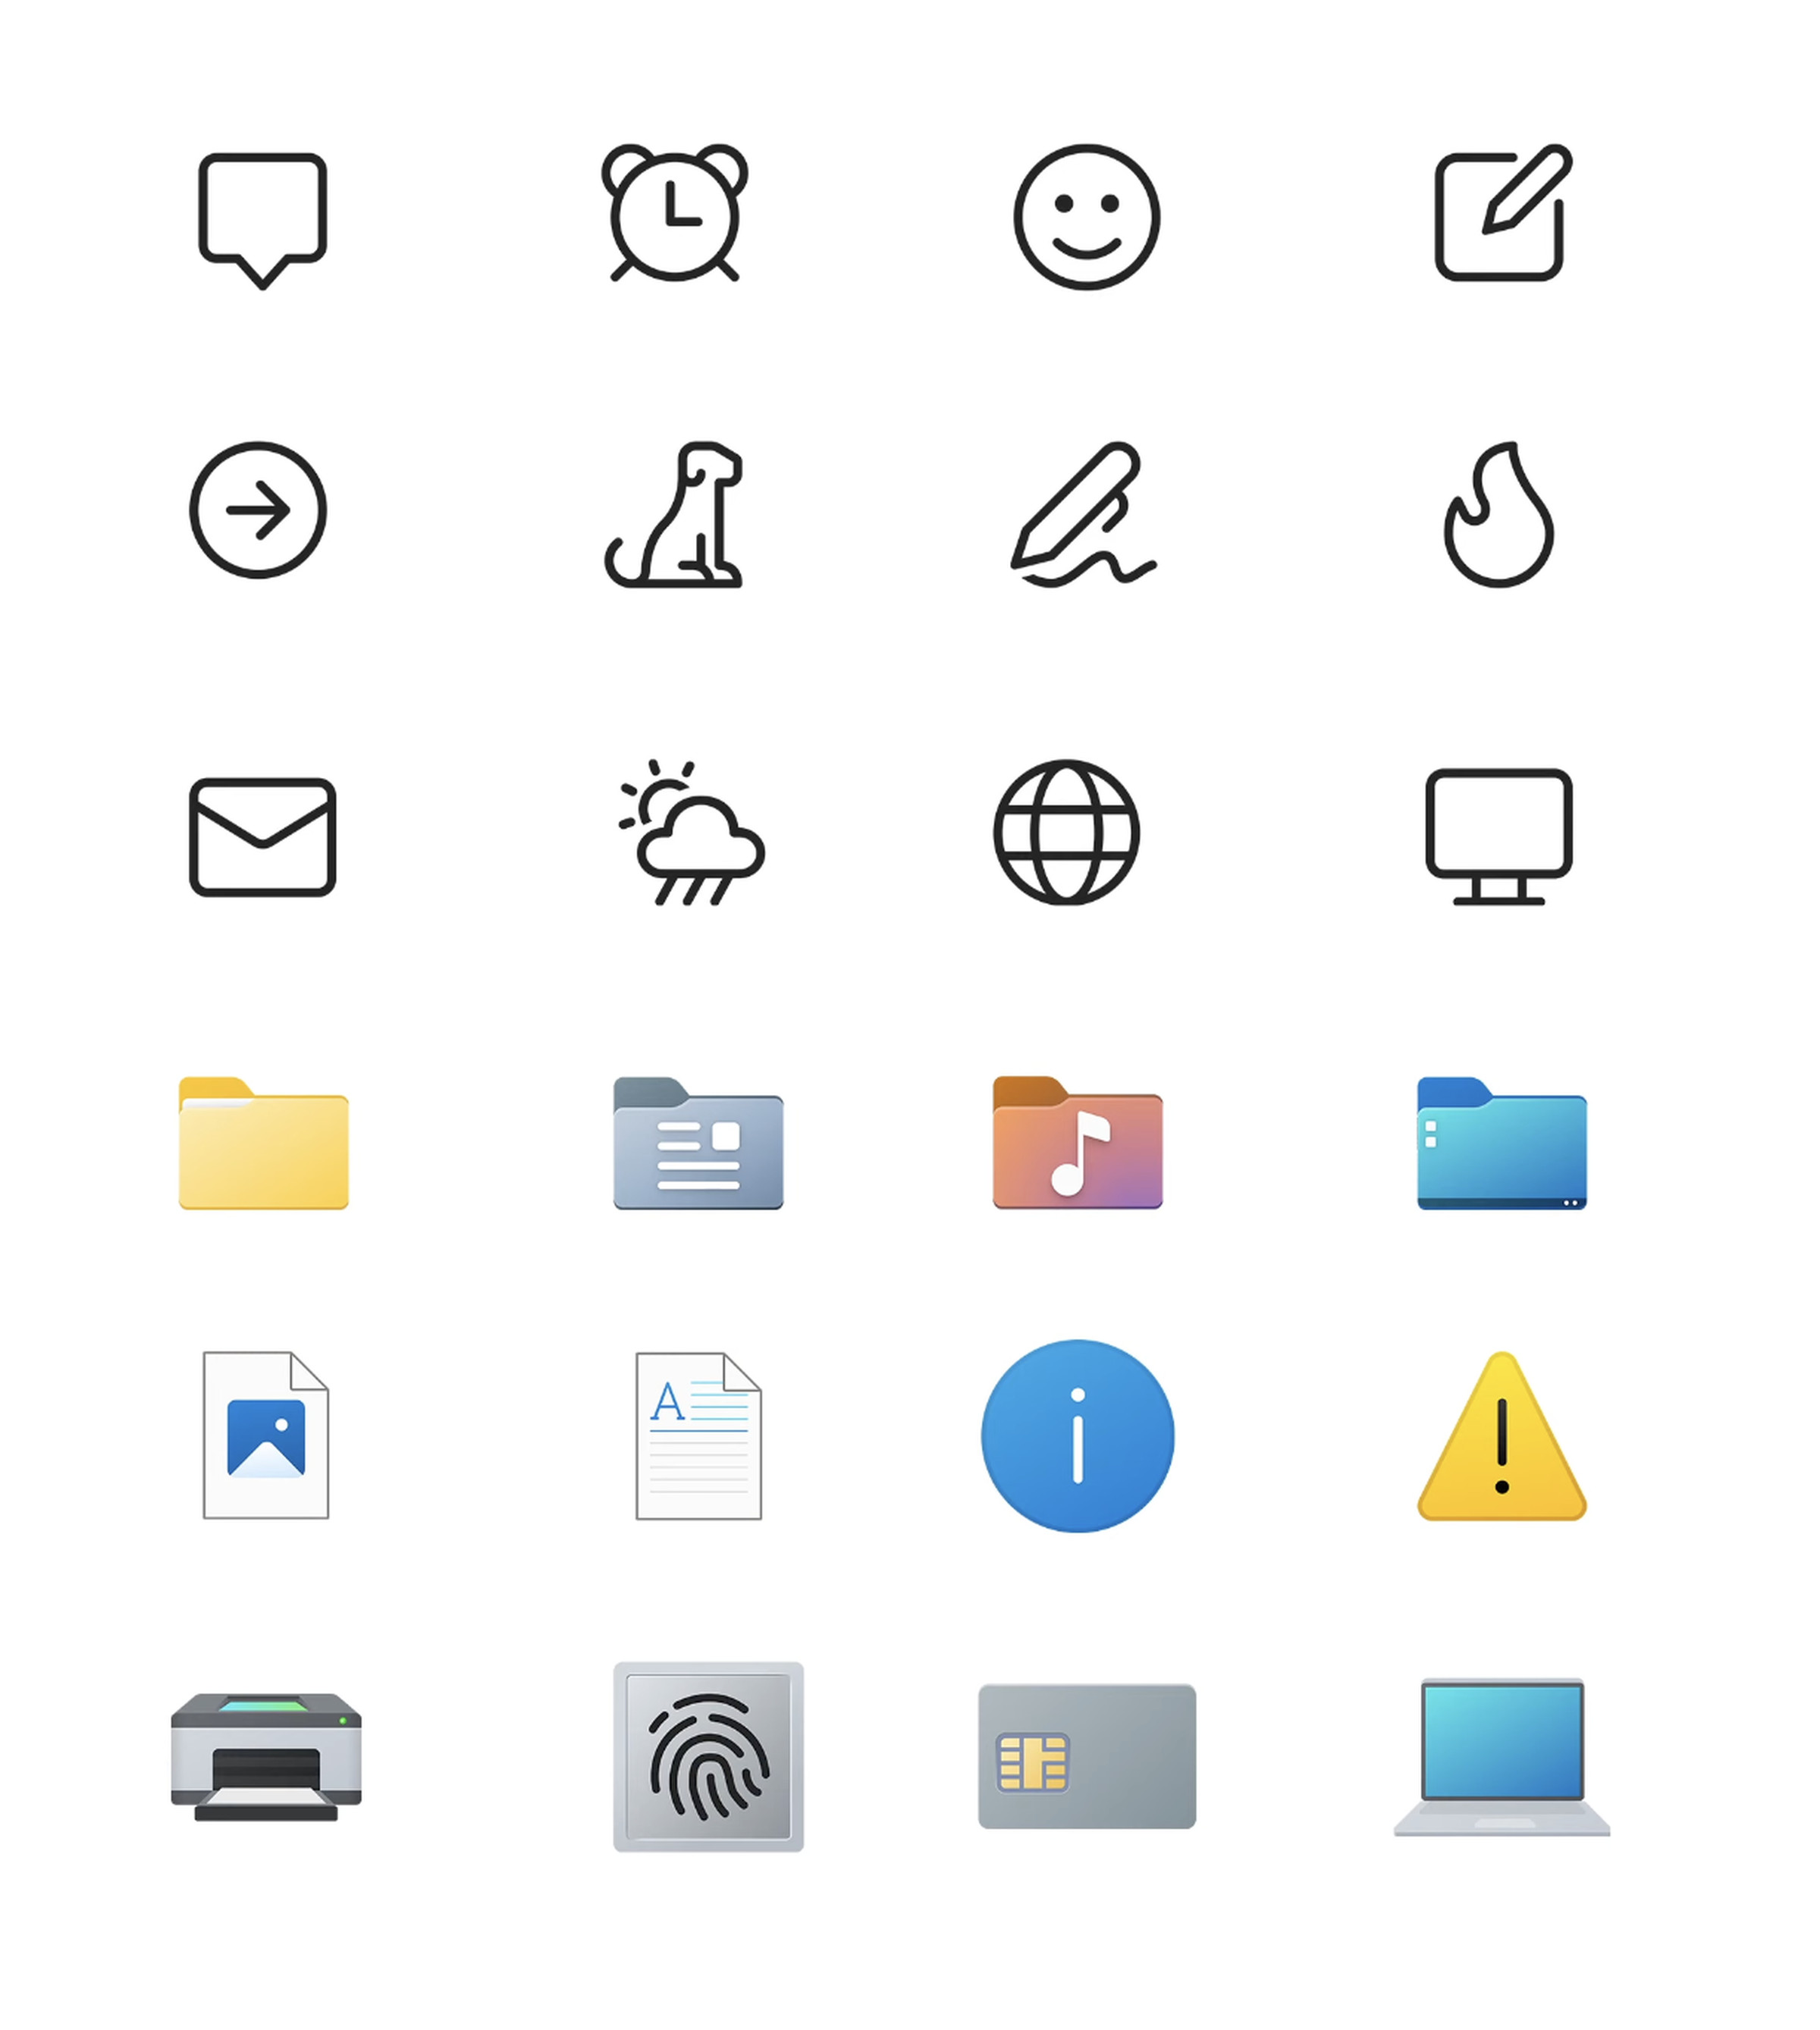 Some of the new icons Microsoft showed off for Windows 11.